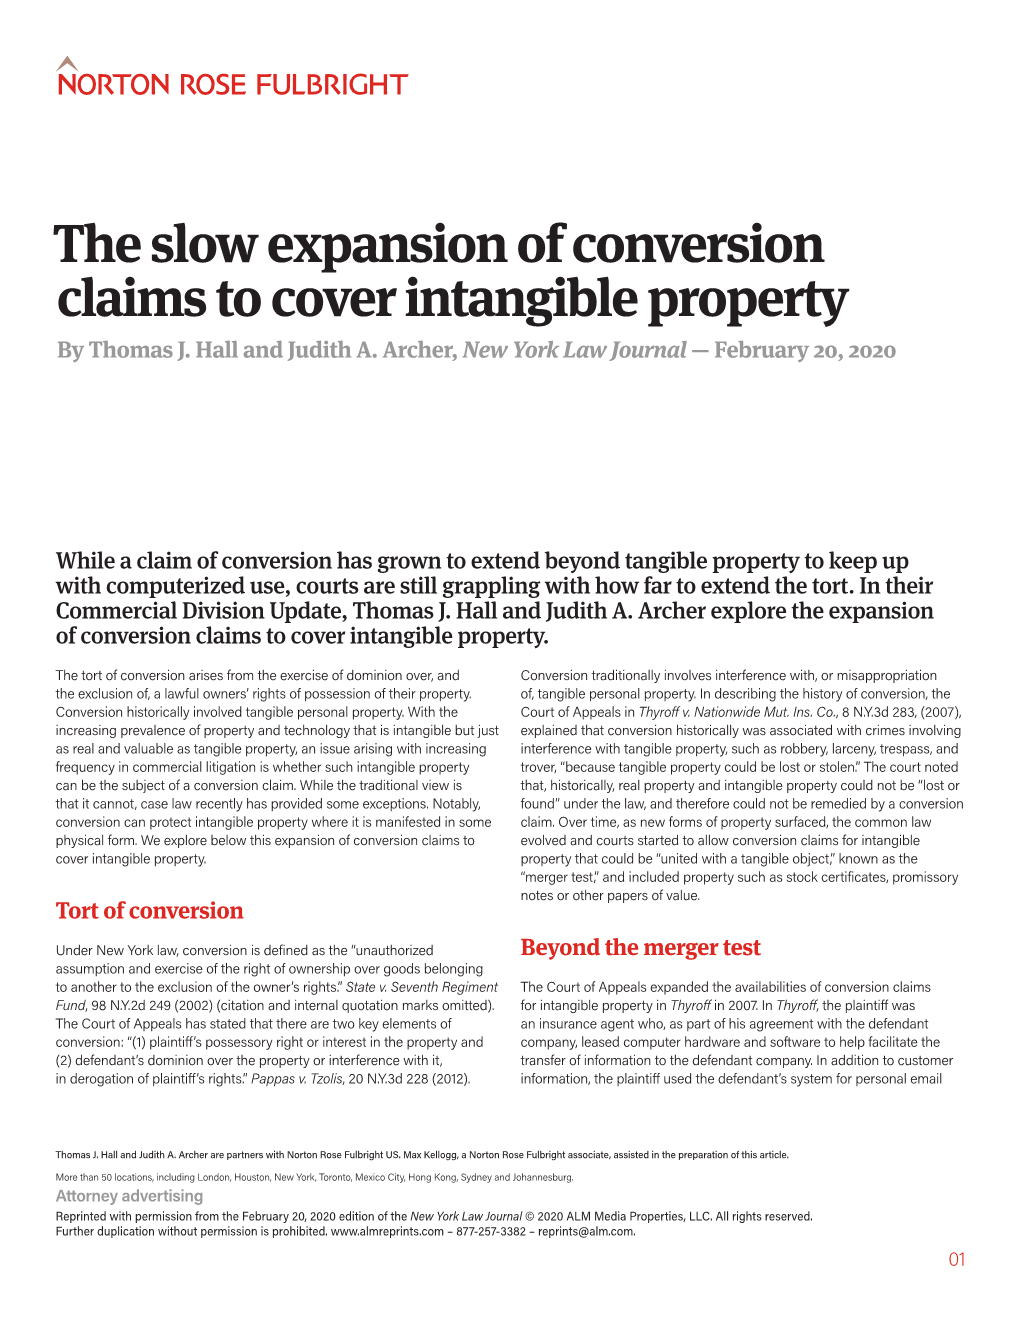 Commercial Division Update: the Slow Expansion of Conversion Claims to Cover Intangible Property